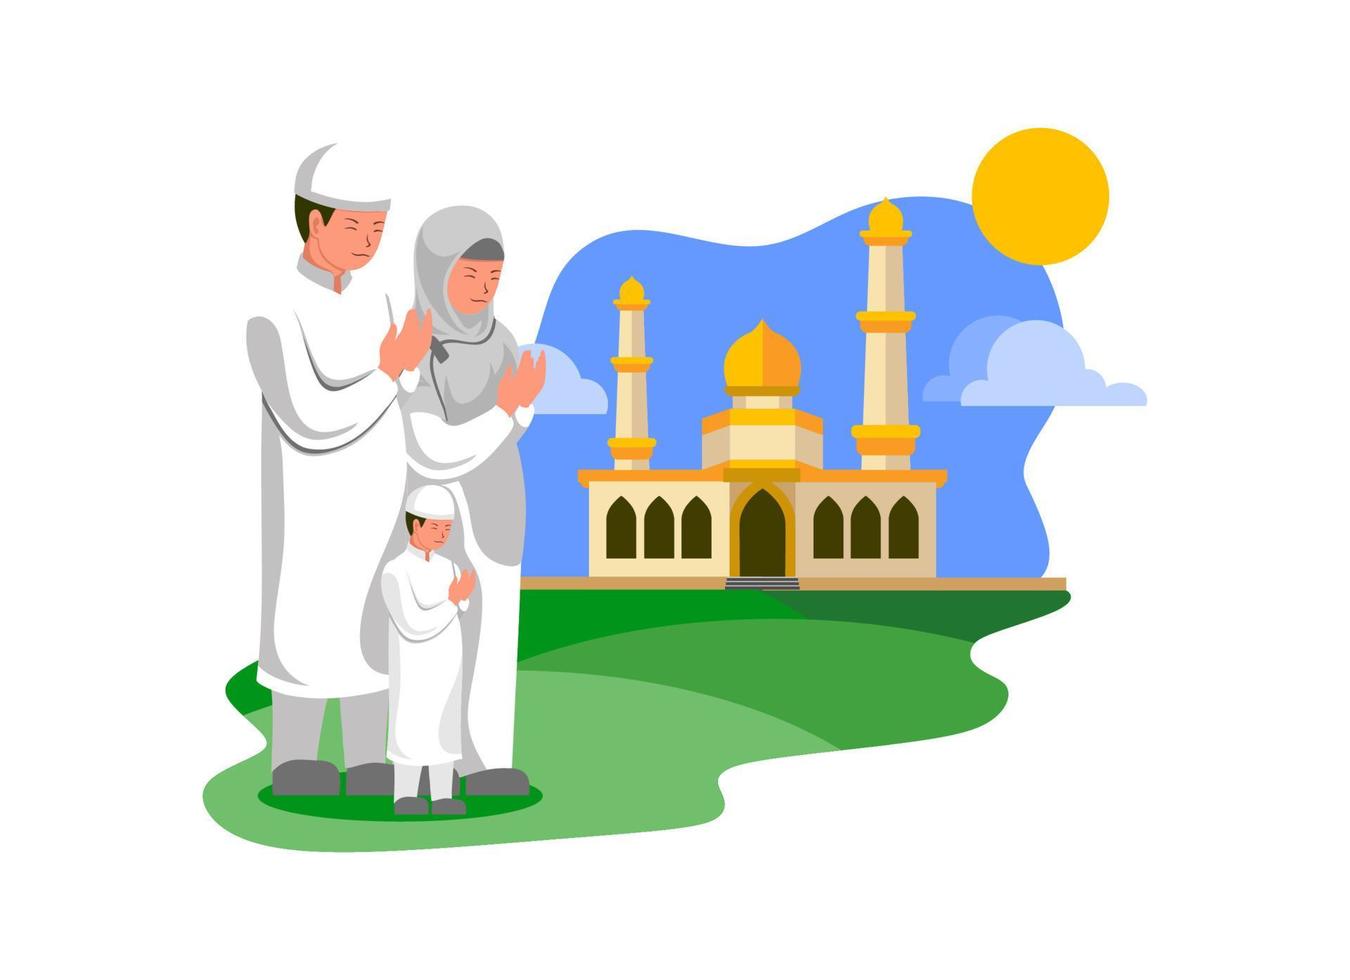 Family Prayer with Mosque Illustration in Flat Design vector